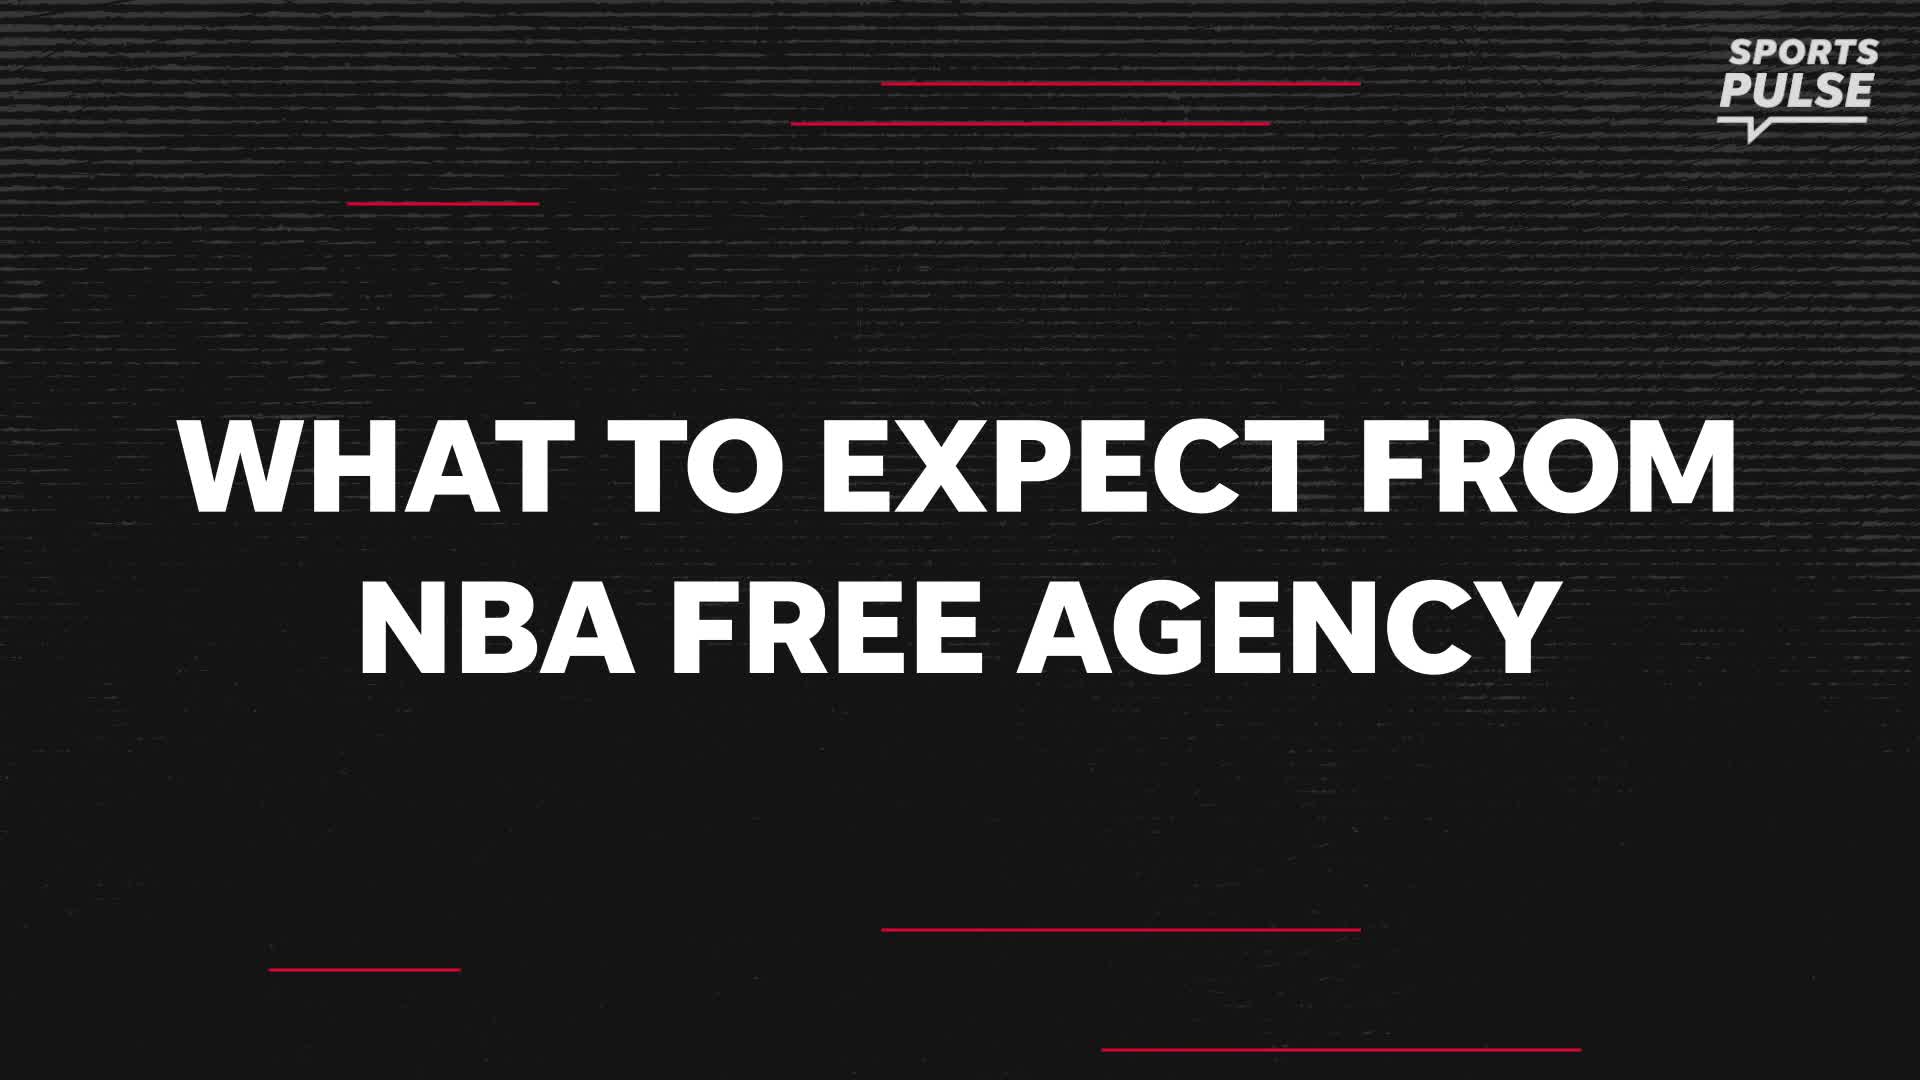 NBA free agency winners and losers Lakers will be contenders; Heat and Mavs are TBD